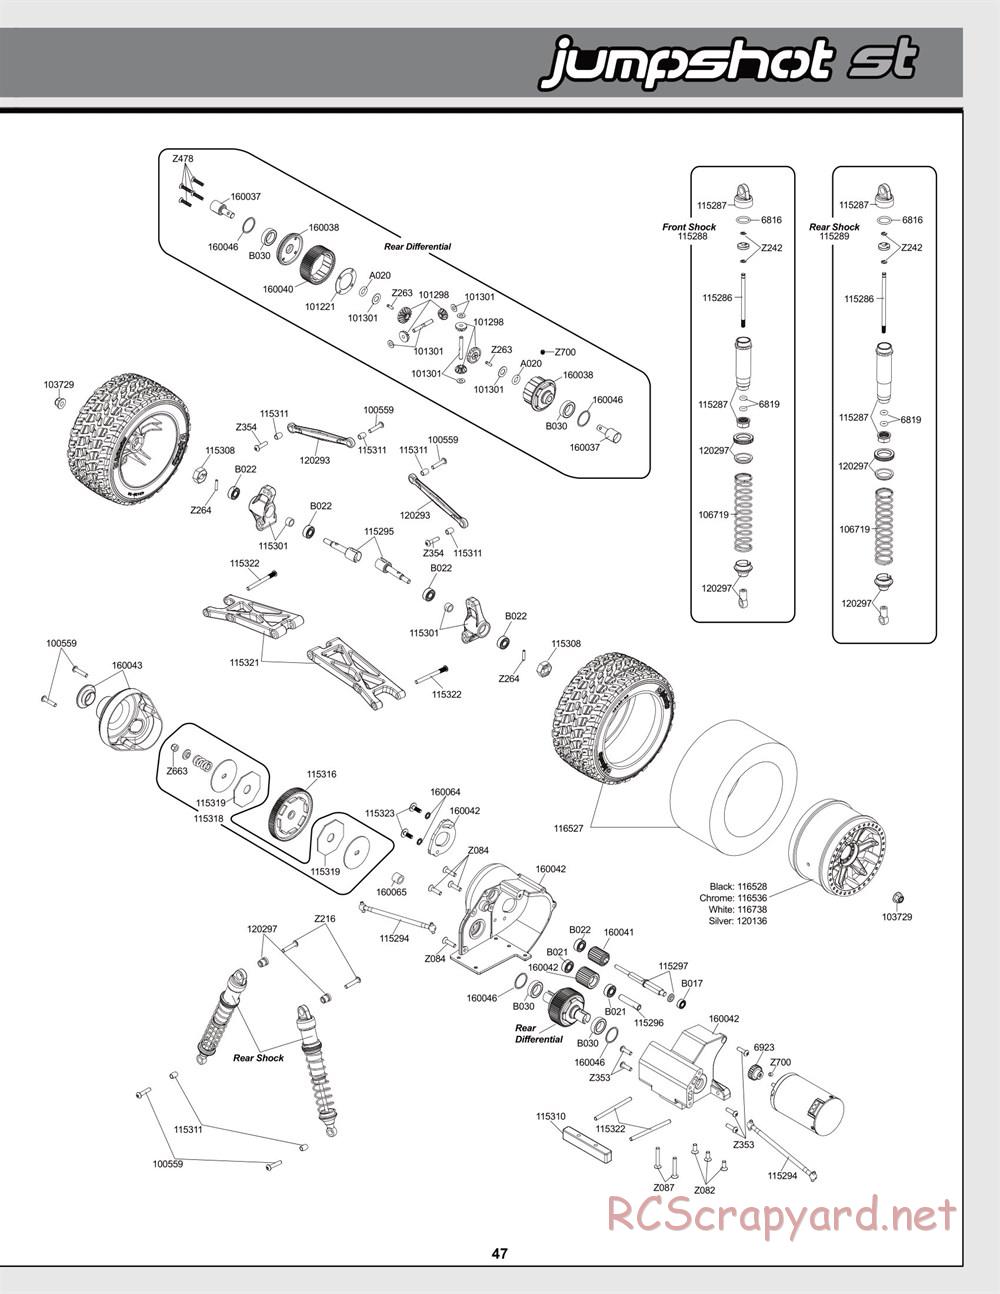 HPI - Jumpshot MT Flux - Exploded View - Page 47